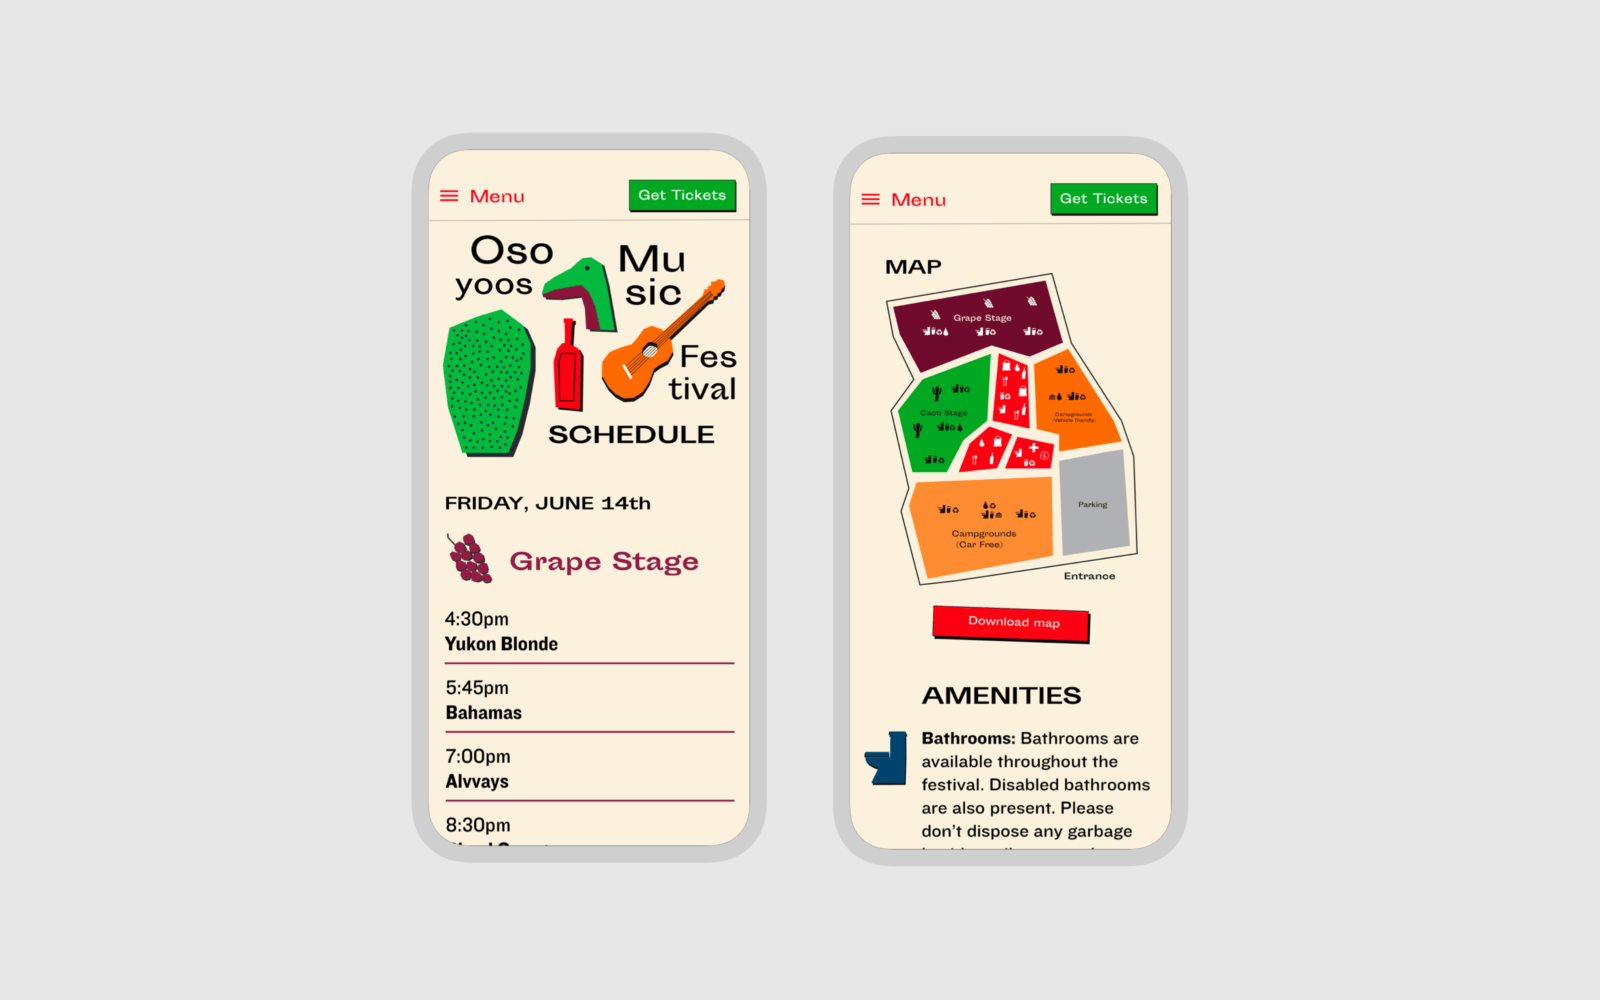 Website mockup: mobile view. The first screen shows the festival schedule. The second screen shows a map of the event and what amenities are available.